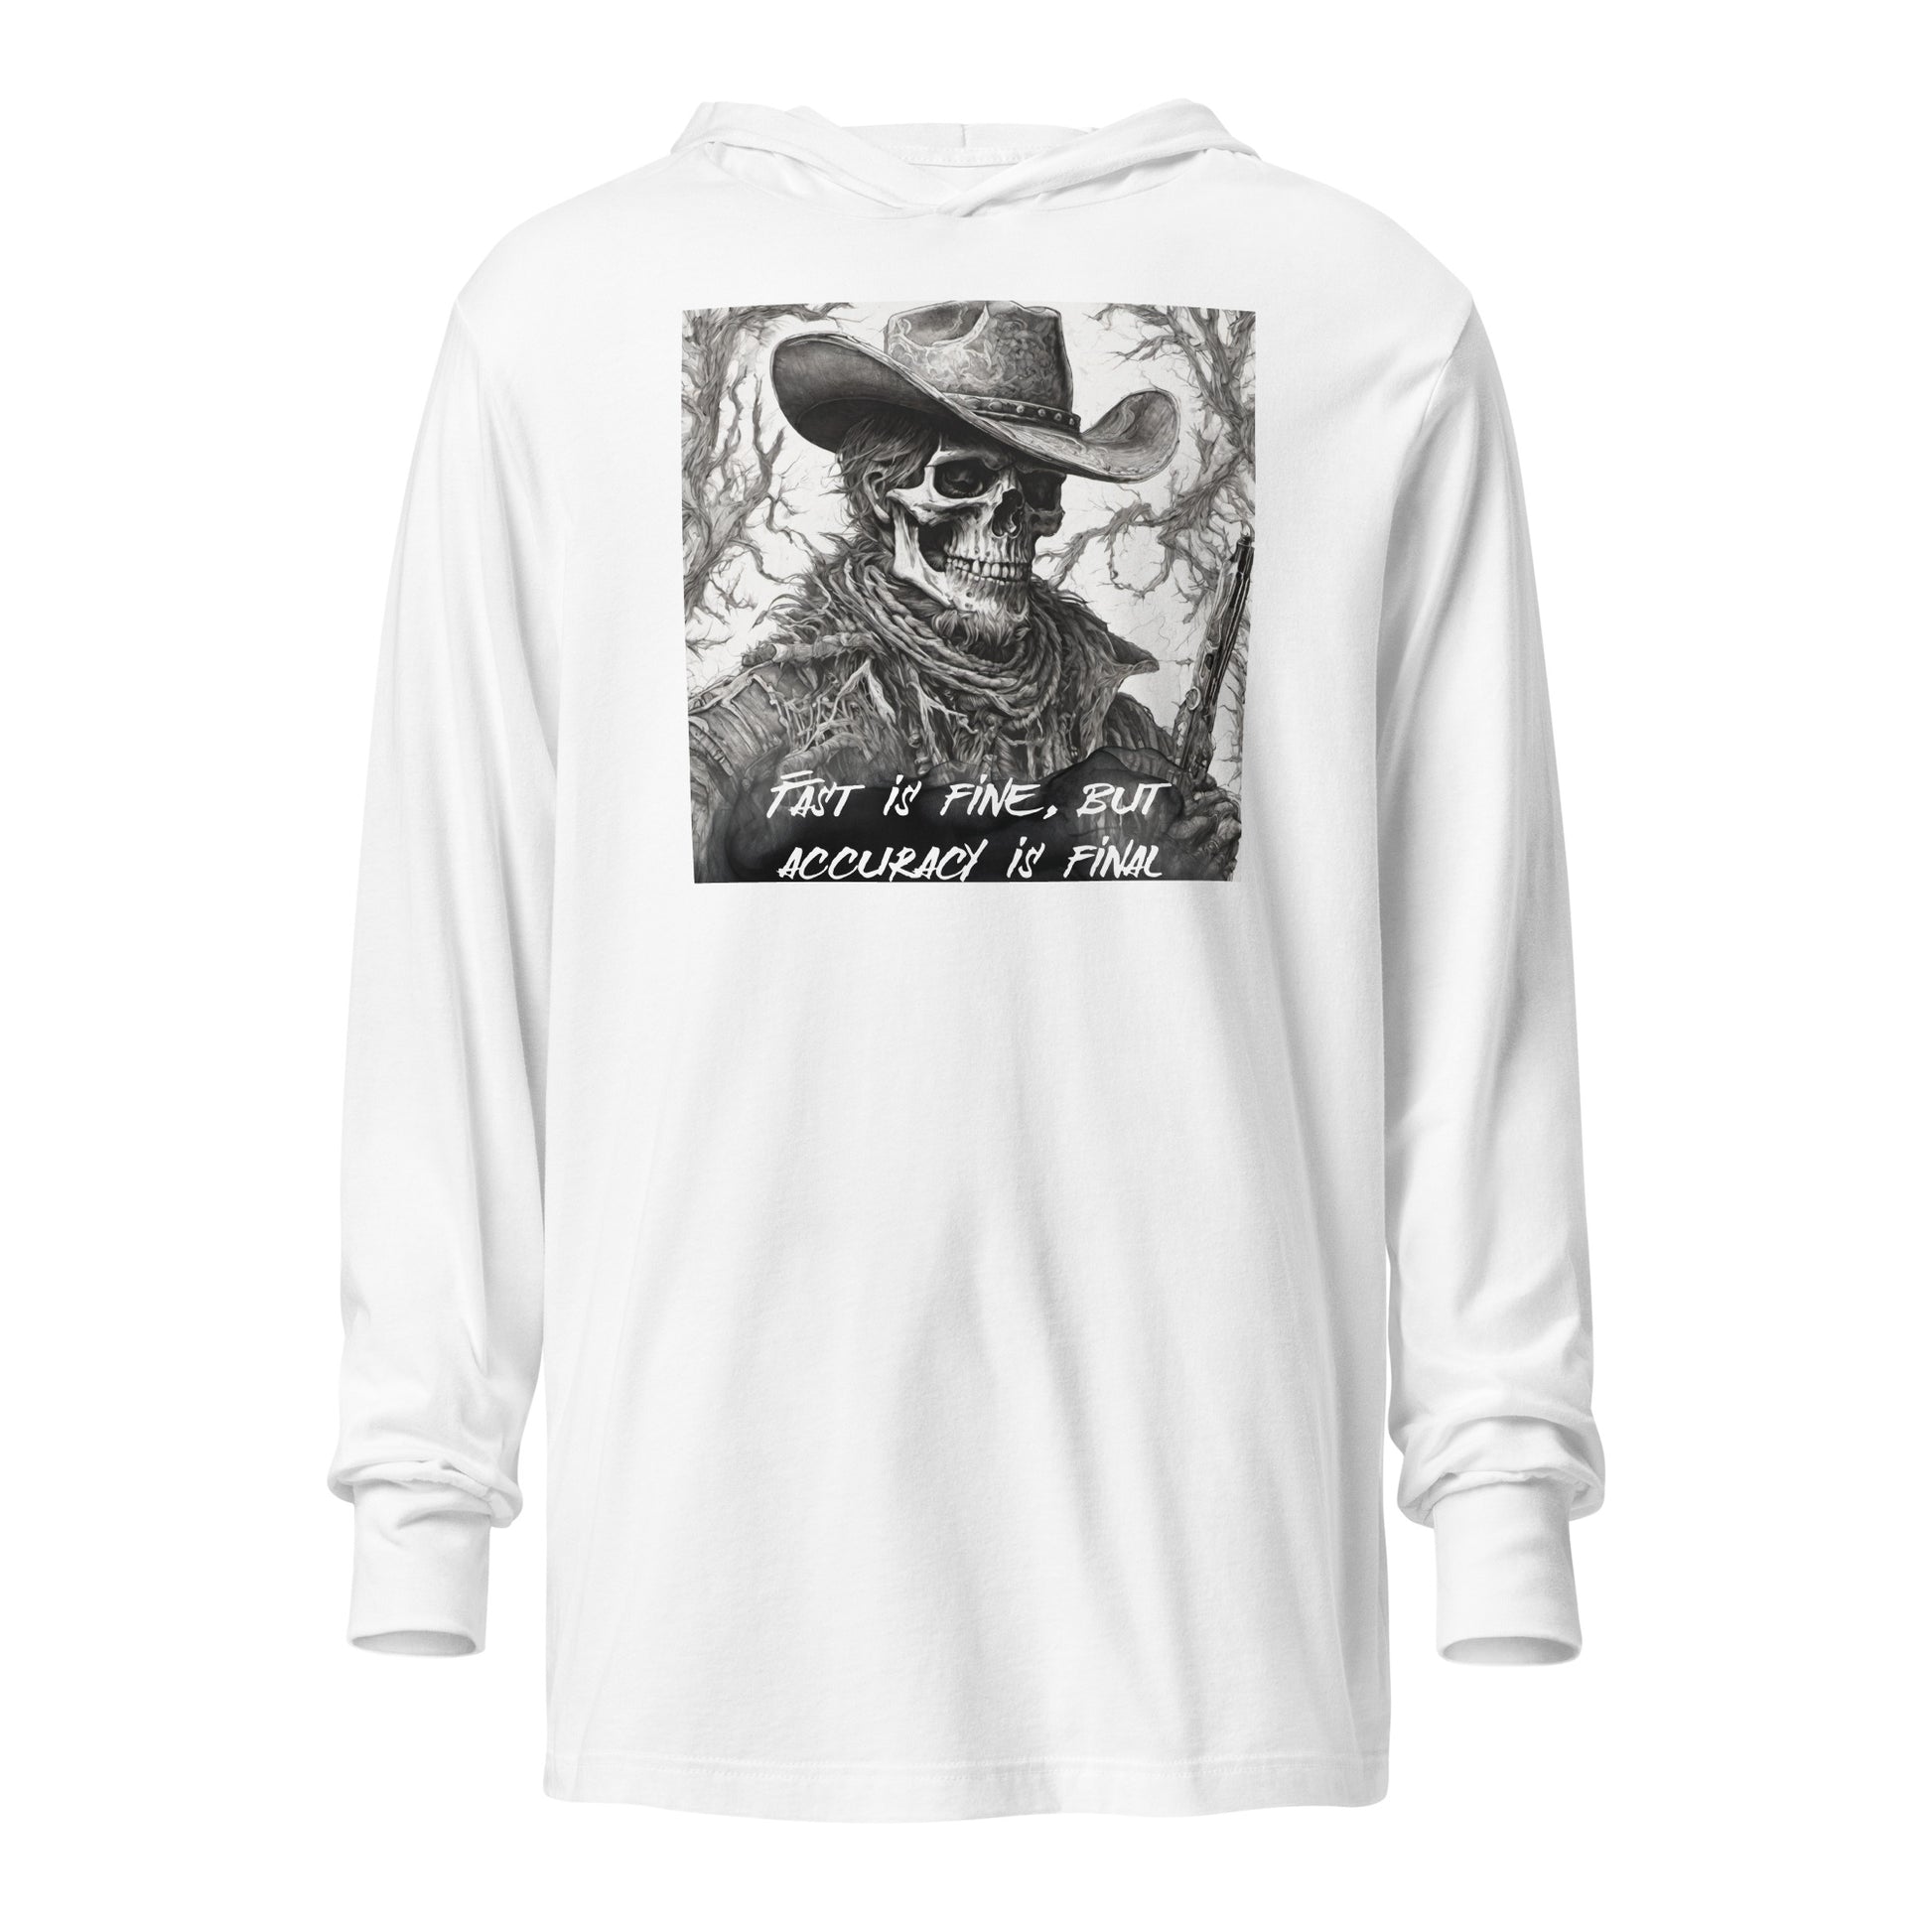 Accuracy is Final Men's Hooded Long-Sleeve Tee White